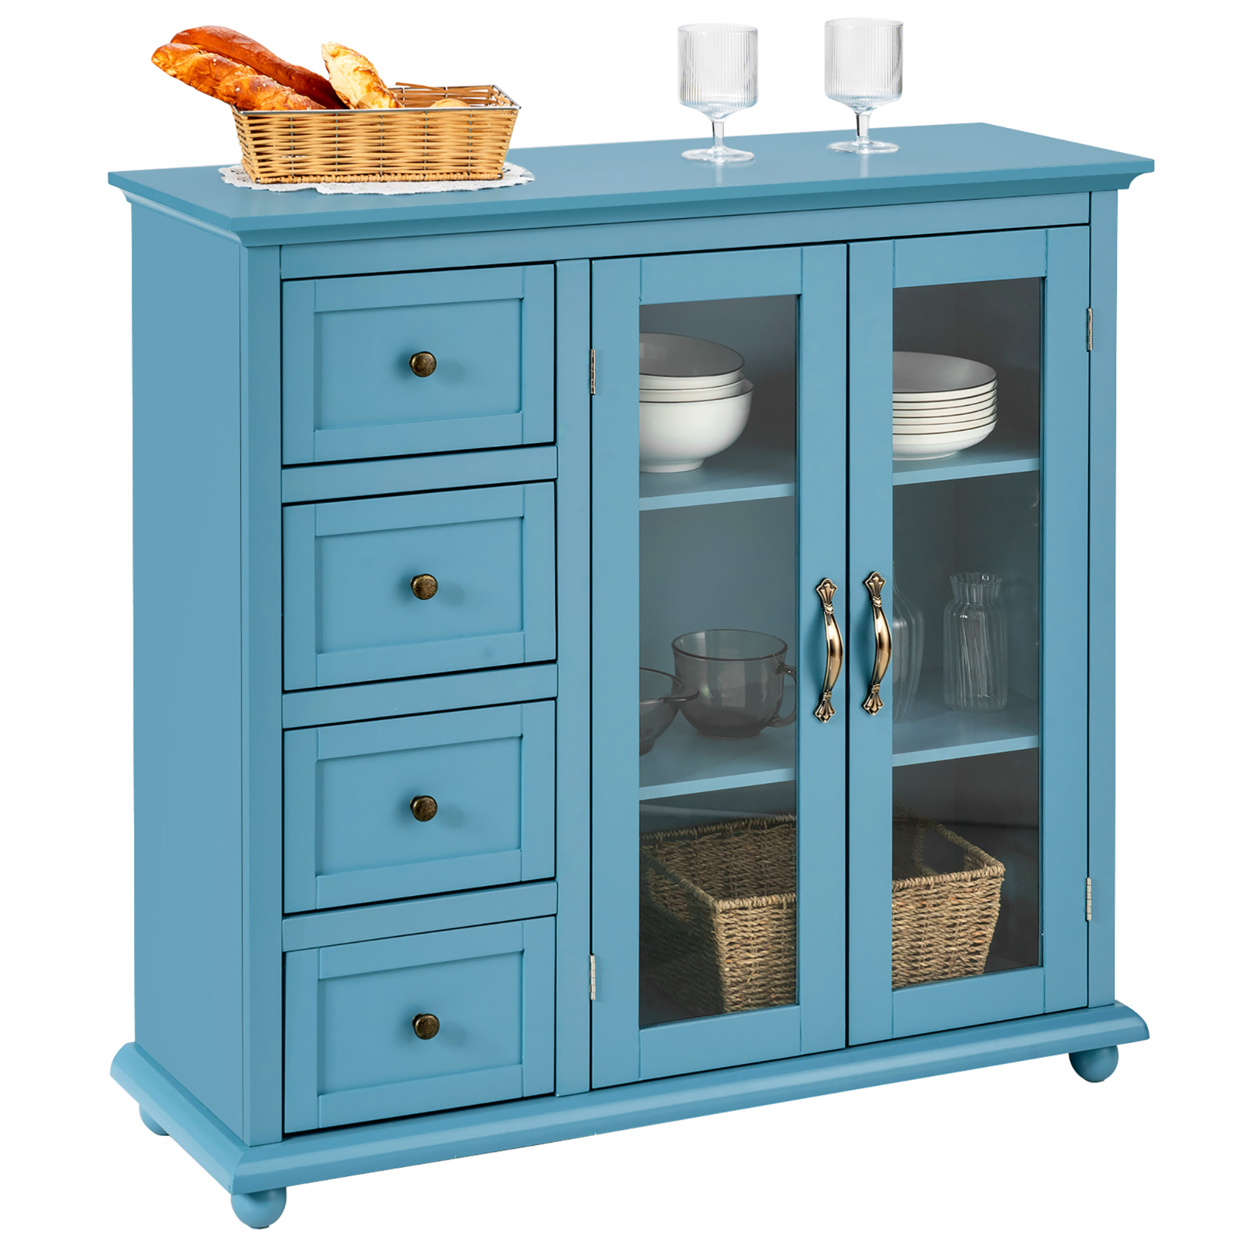  Buffet Sideboard Table Kitchen Storage Cabinet With Drawers And Doors for Simple Design